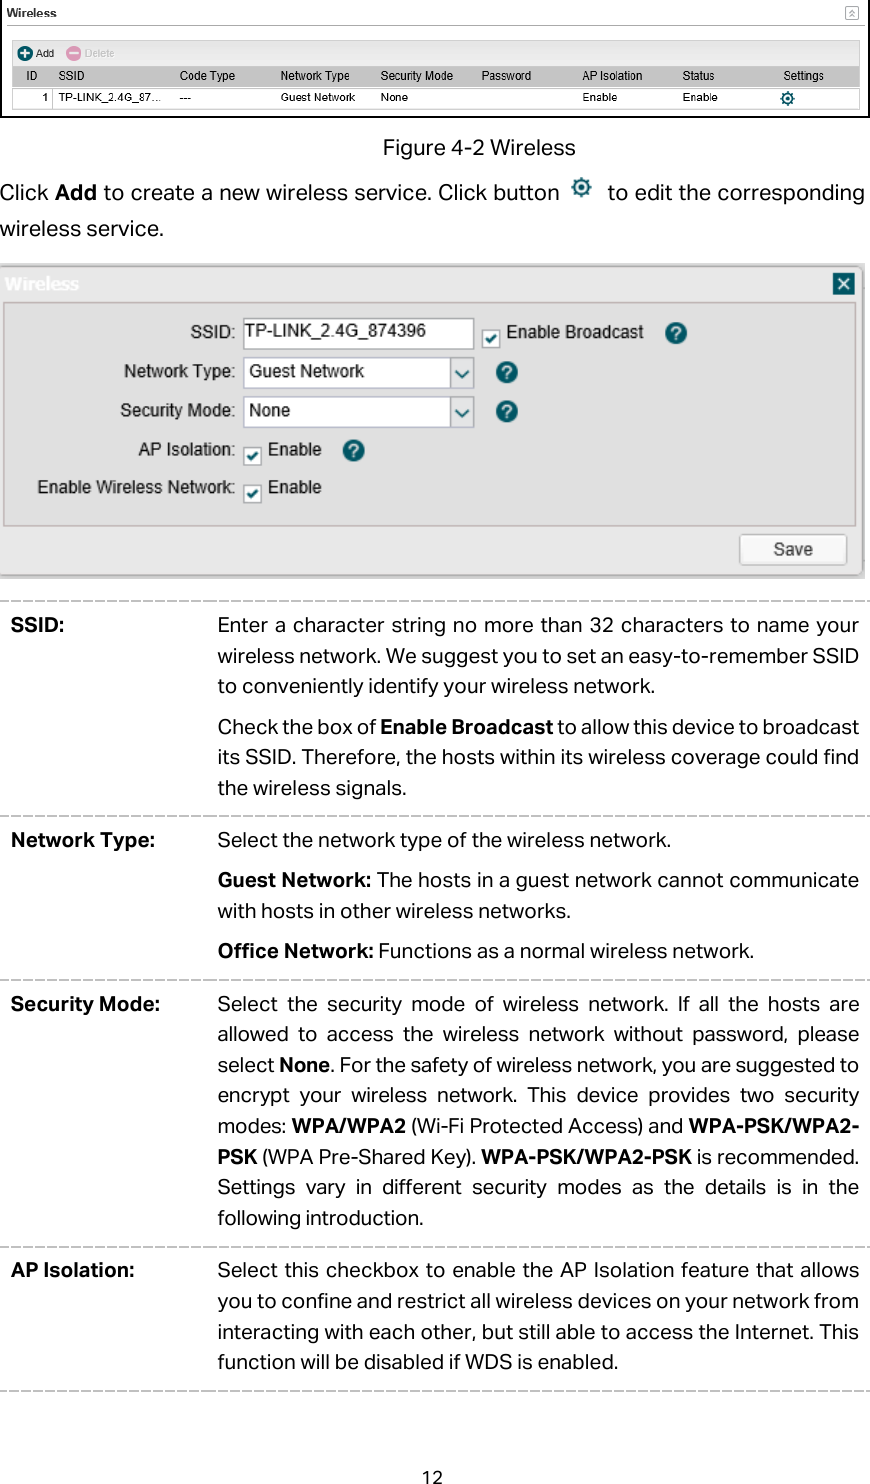  Figure 4-2 Wireless Click Add to create a new wireless service. Click button   to edit the corresponding wireless service.  SSID: Enter a character string no more than 32 characters to name your wireless network. We suggest you to set an easy-to-remember SSID to conveniently identify your wireless network.   Check the box of Enable Broadcast to allow this device to broadcast its SSID. Therefore, the hosts within its wireless coverage could find the wireless signals. Network Type: Select the network type of the wireless network.   Guest Network: The hosts in a guest network cannot communicate with hosts in other wireless networks.   Office Network: Functions as a normal wireless network. Security Mode: Select the security mode of wireless network. If all the hosts are allowed to access the wireless network without password, please select None. For the safety of wireless network, you are suggested to encrypt your wireless network. This device provides two security modes: WPA/WPA2 (Wi-Fi Protected Access) and WPA-PSK/WPA2-PSK (WPA Pre-Shared Key). WPA-PSK/WPA2-PSK is recommended. Settings vary in different security modes as the details is in the following introduction.   AP Isolation: Select this checkbox to enable the AP Isolation feature that allows you to confine and restrict all wireless devices on your network from interacting with each other, but still able to access the Internet. This function will be disabled if WDS is enabled. 12 